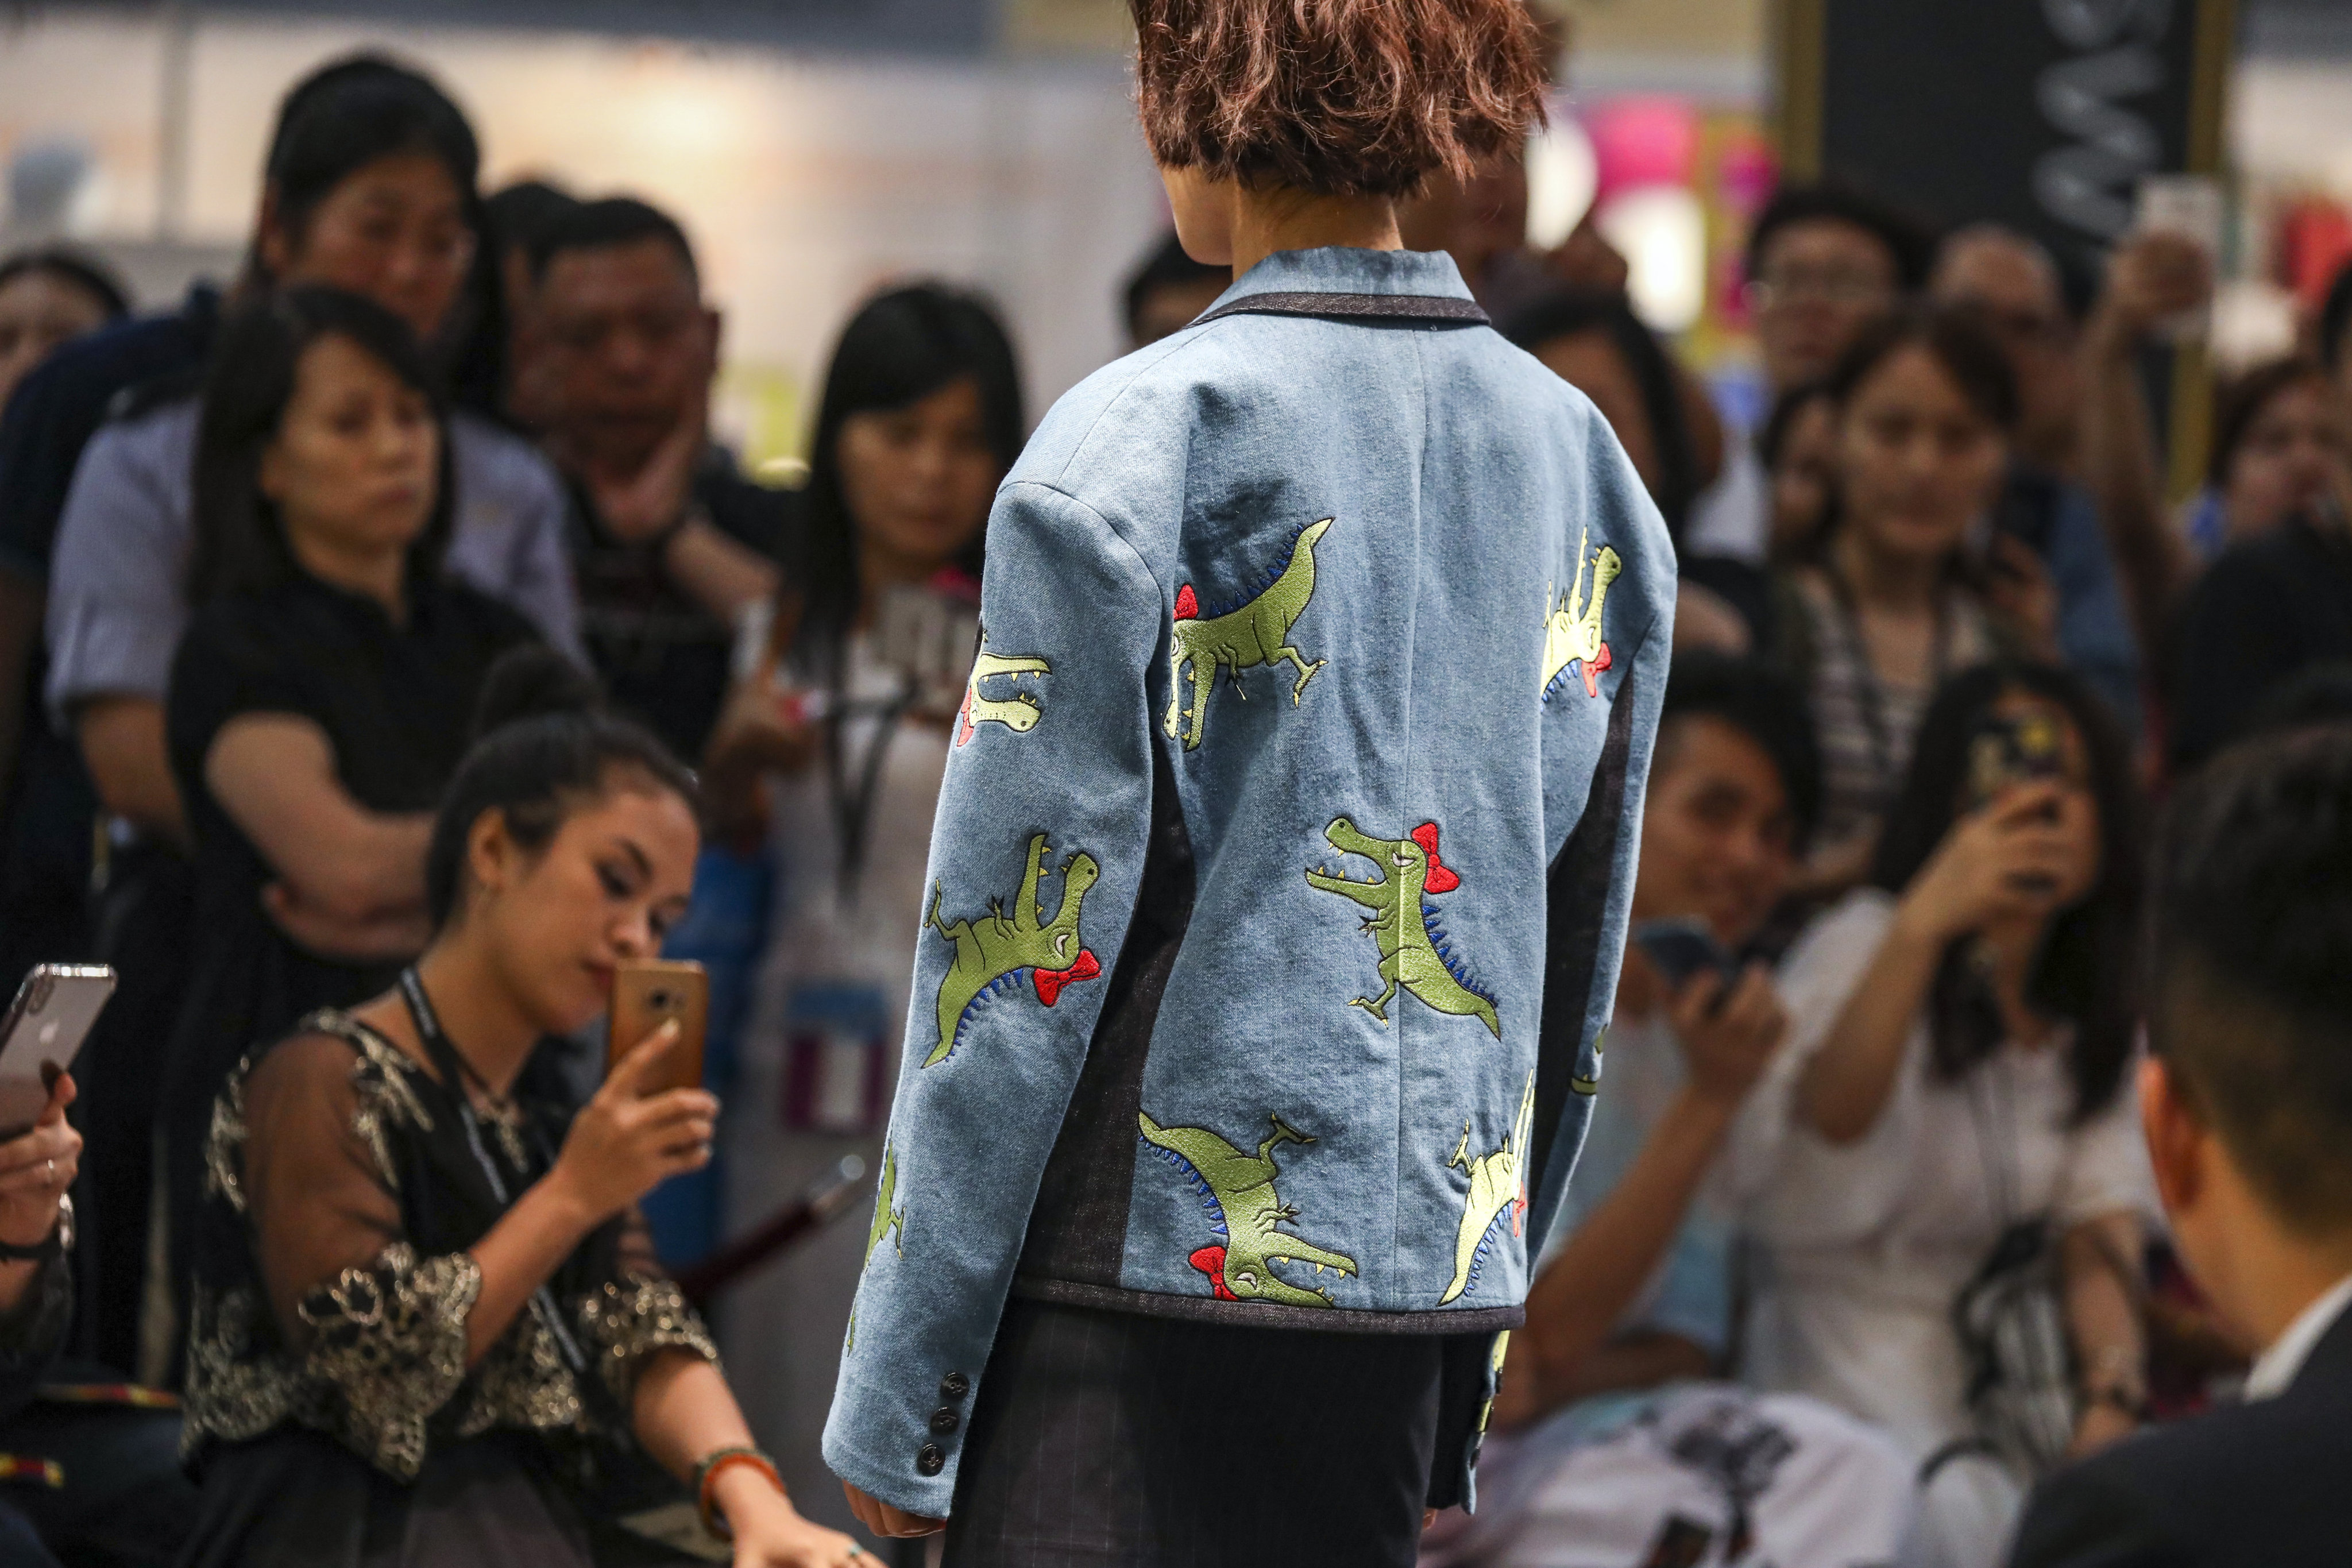 People take photos of a show at the Hong Kong Fashion Week  in July 2019. Hong Kong’s design and manufacturing ecosystem and its links to the Greater Bay Area and the rest of Asia are advantages it should tap. Photo: Nora Tam 